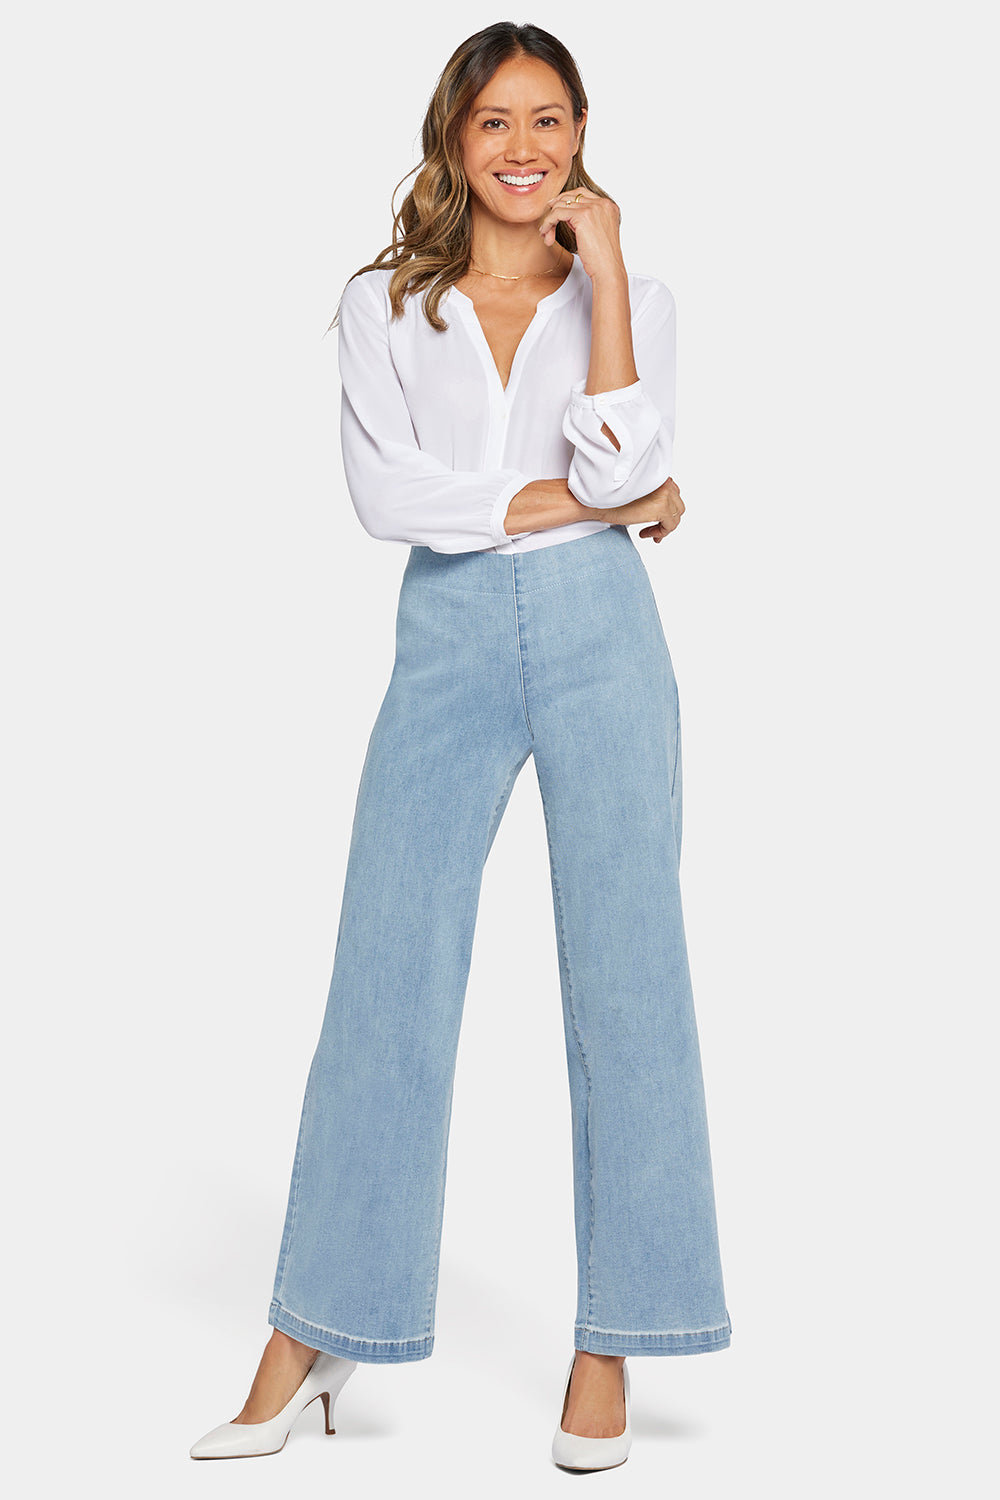 Women's Wide Leg Jeans - Pull-On, Ankle & High Rise | NYDJ Apparel